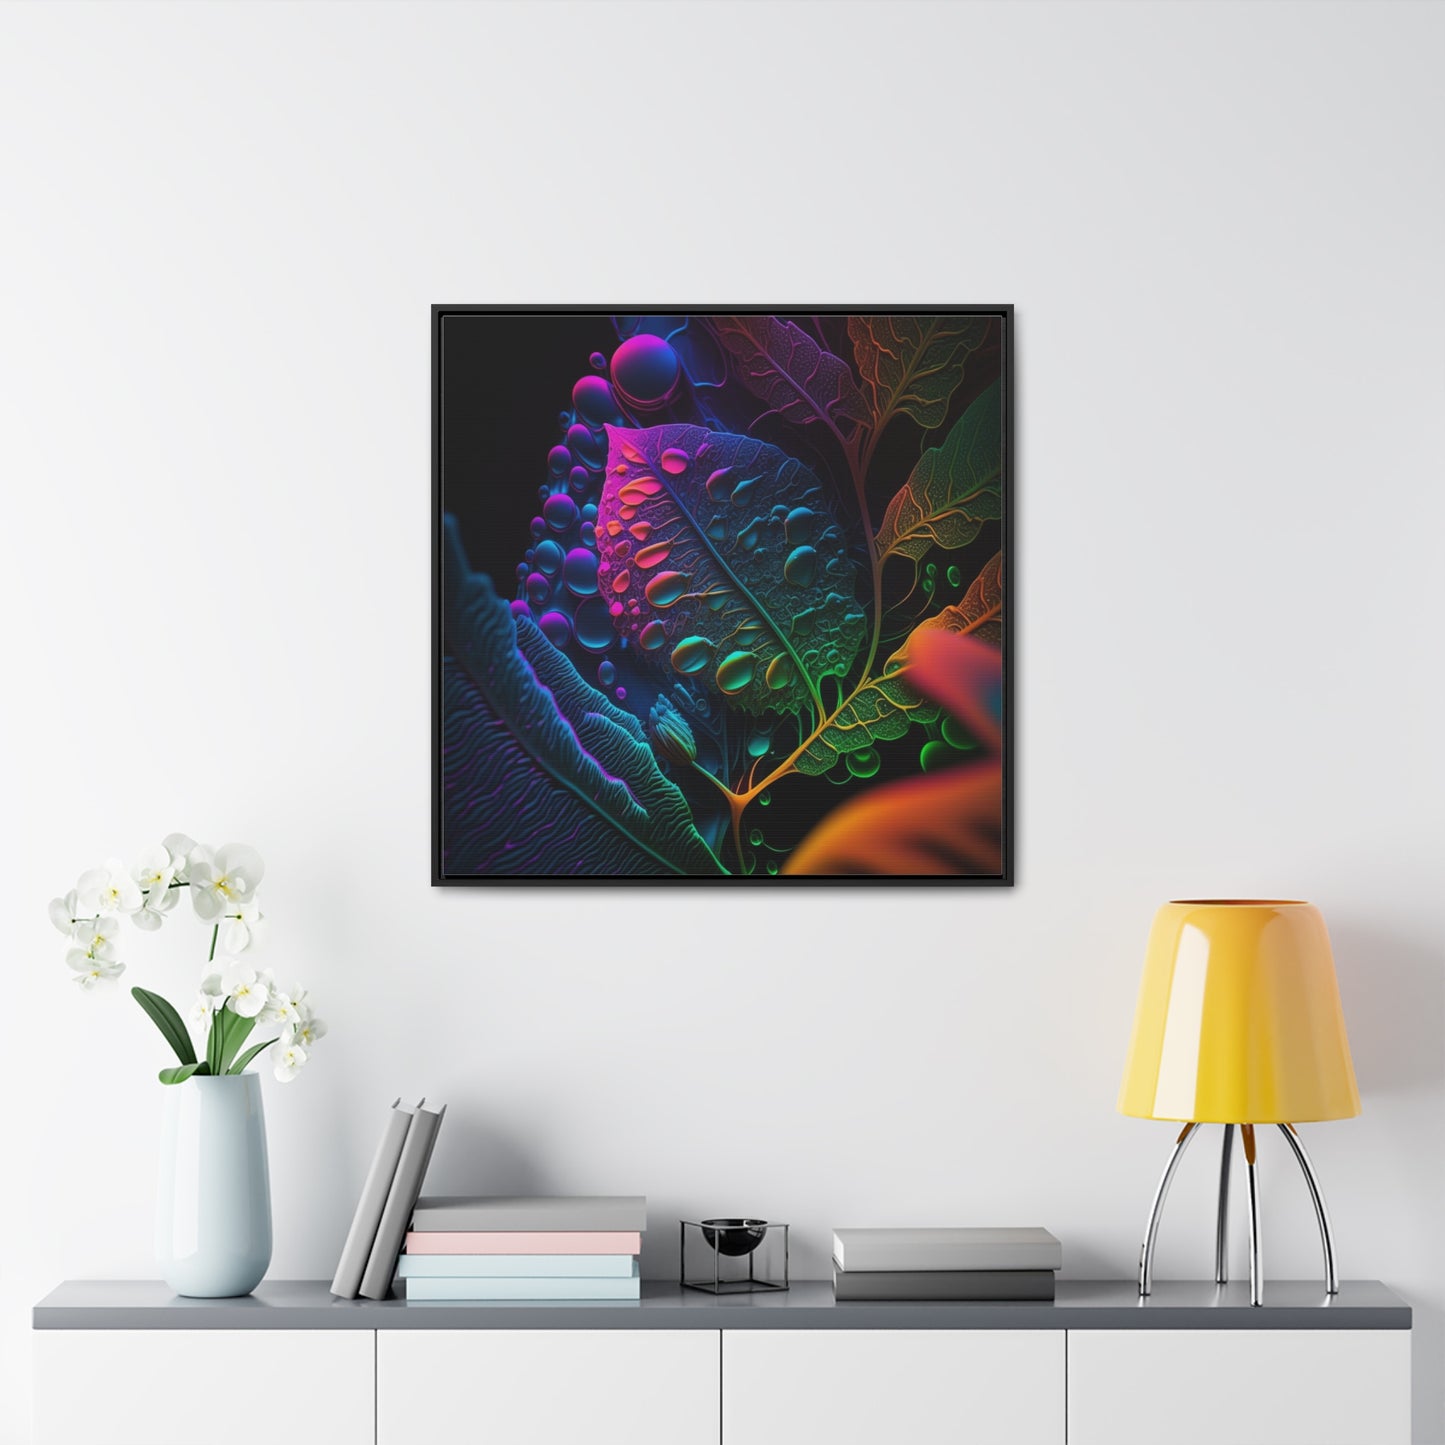 Gallery Canvas Wraps, Square Frame Macro Reef Florescent 4